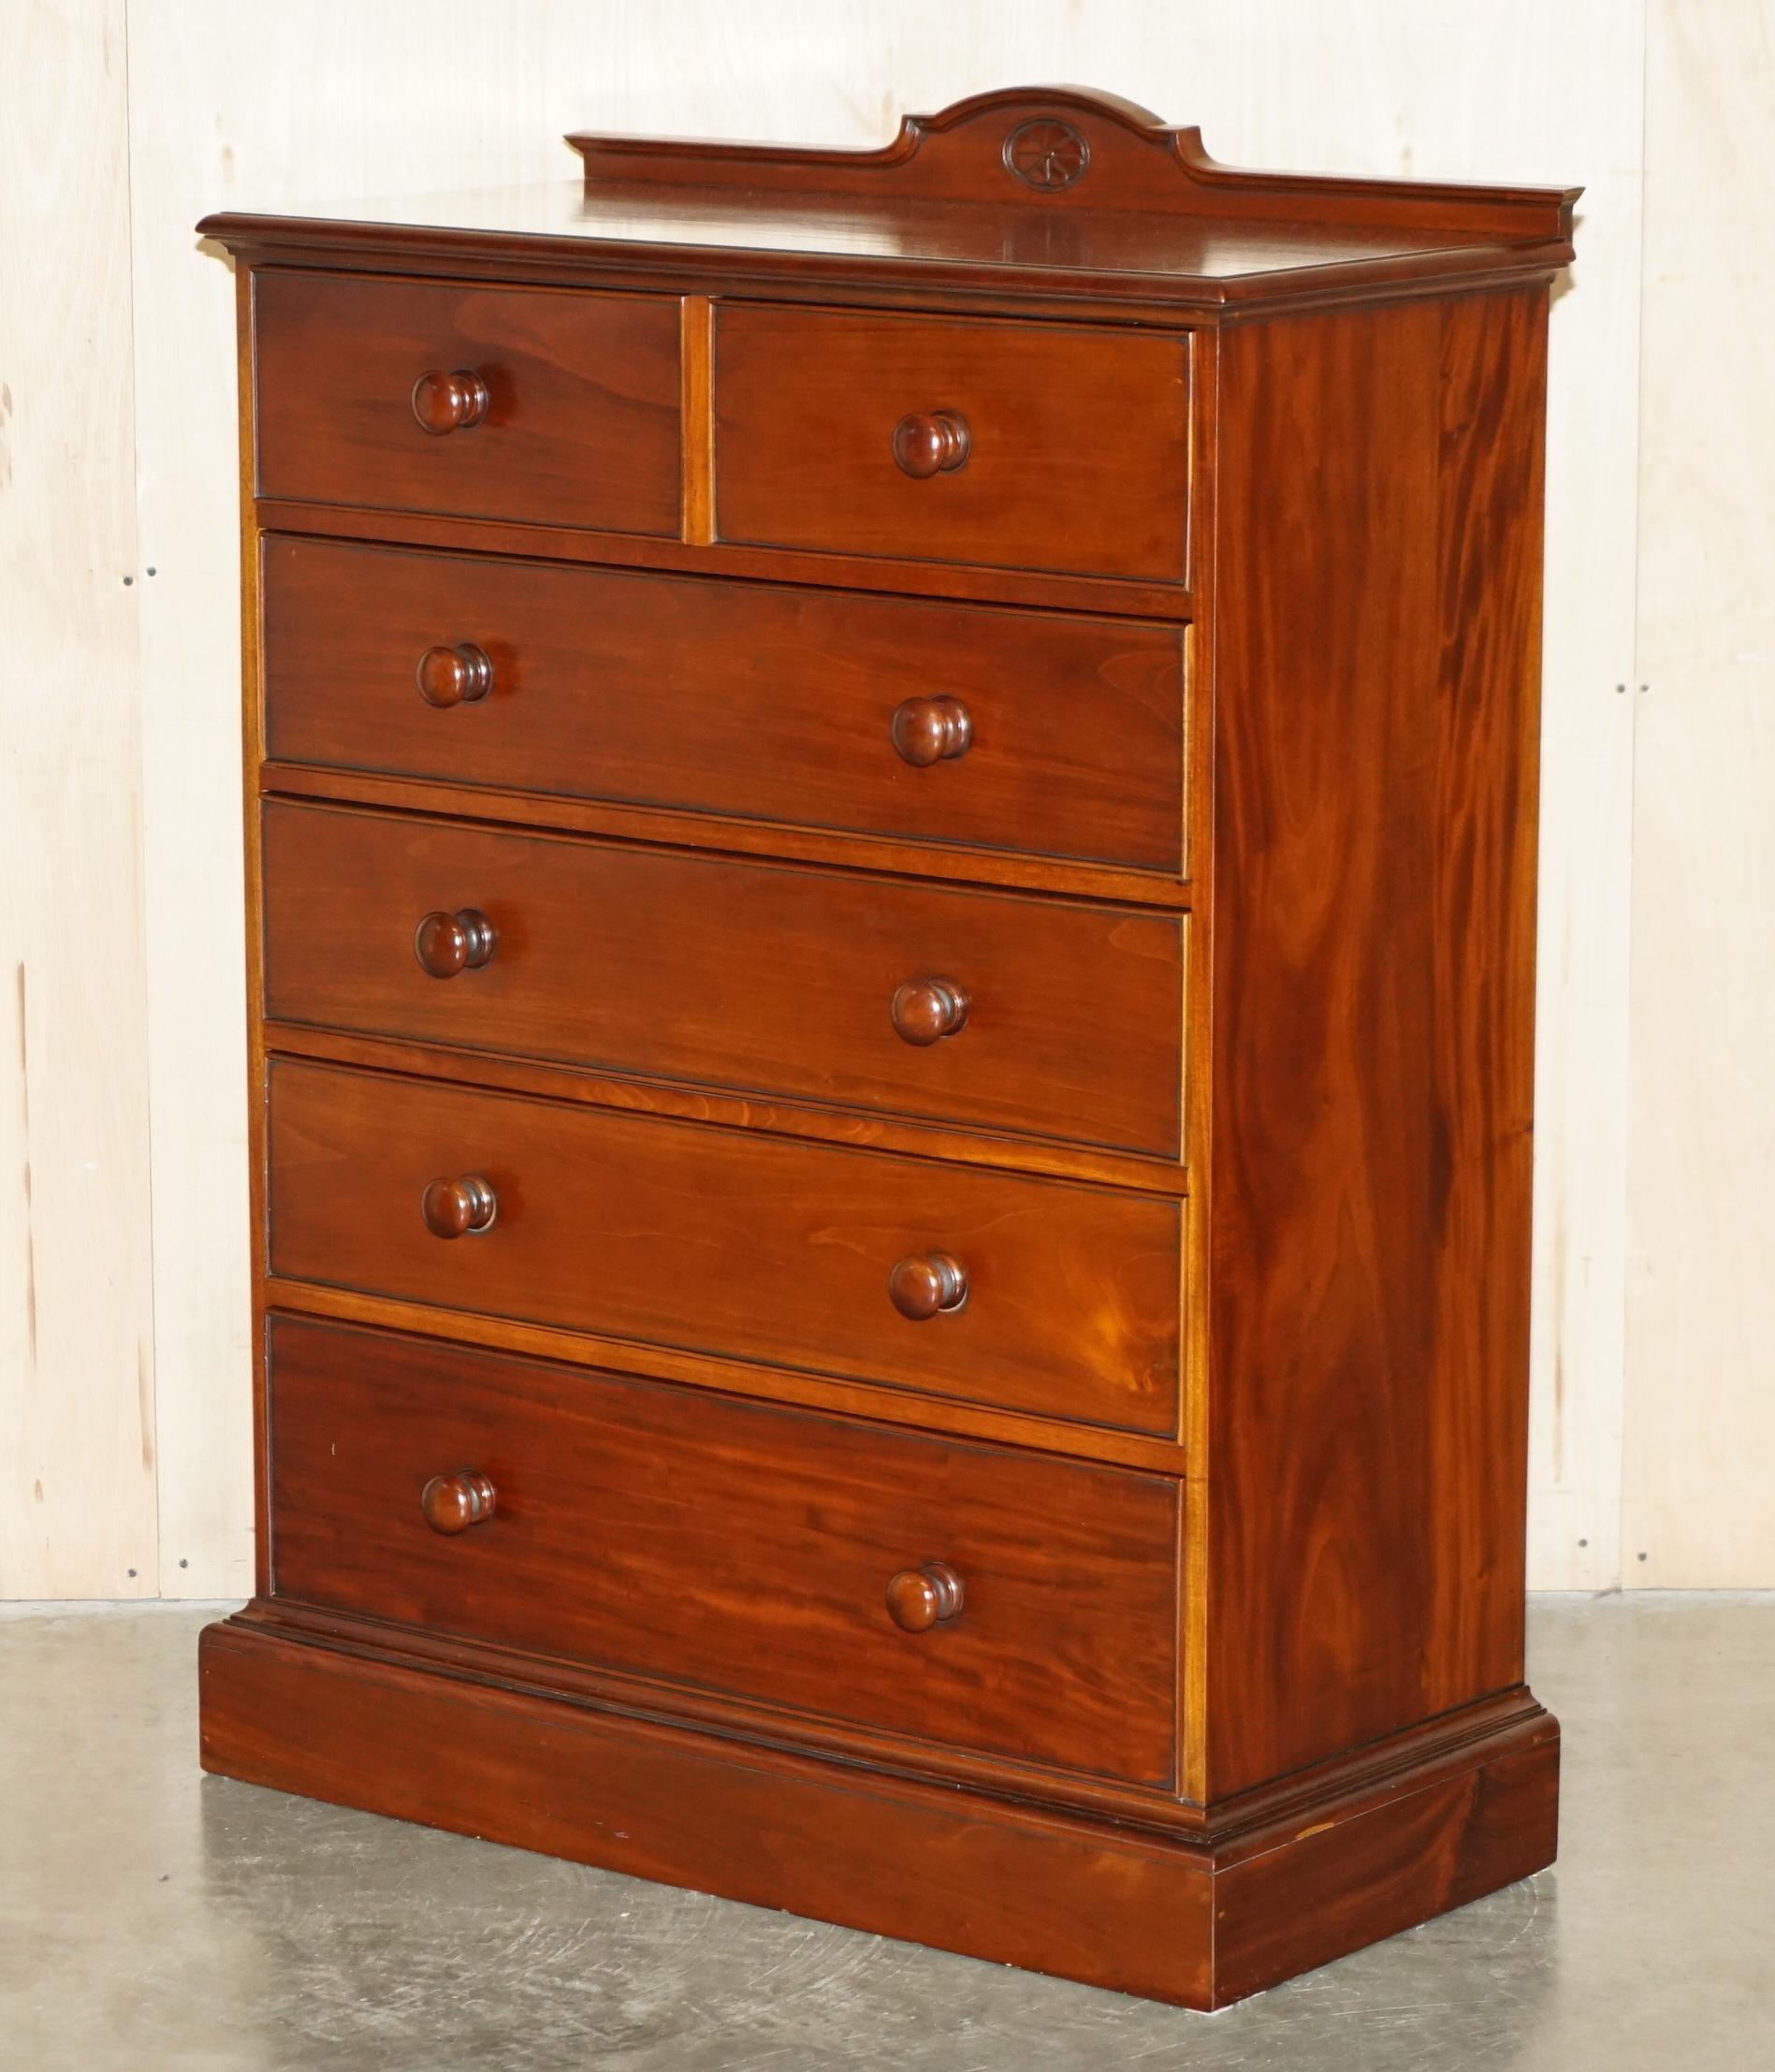 EXQUISITE PAIR OF ViNTAGE FLAMED HARDWOOD CHEST OF DRAWERS PART OF A SUITE For Sale 7